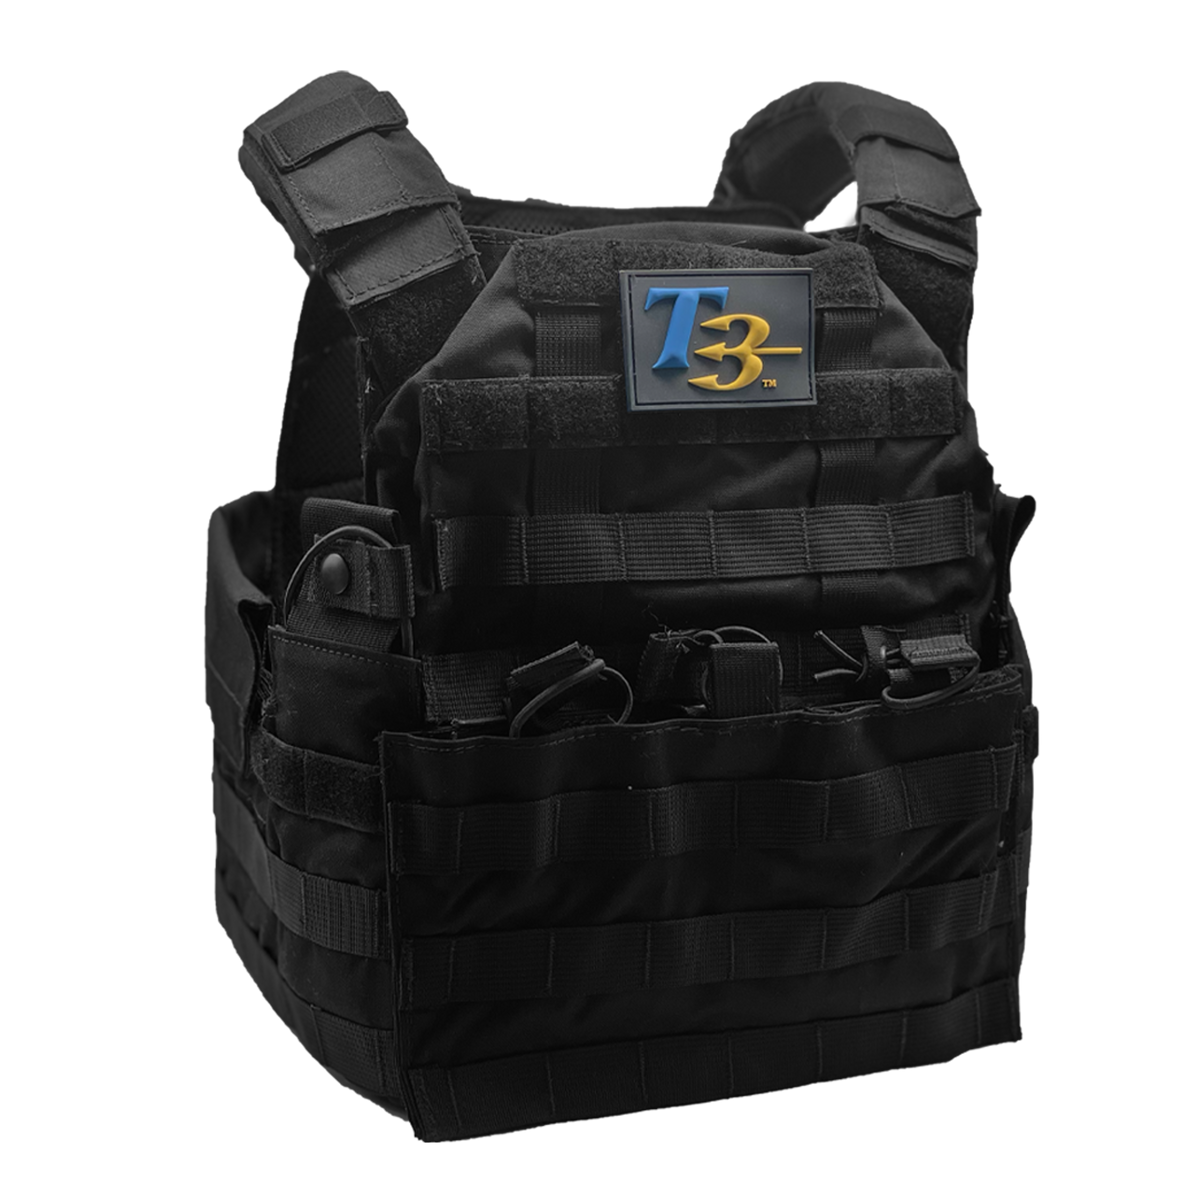 T3 Geronimo 2 "G2" Plate Carrier